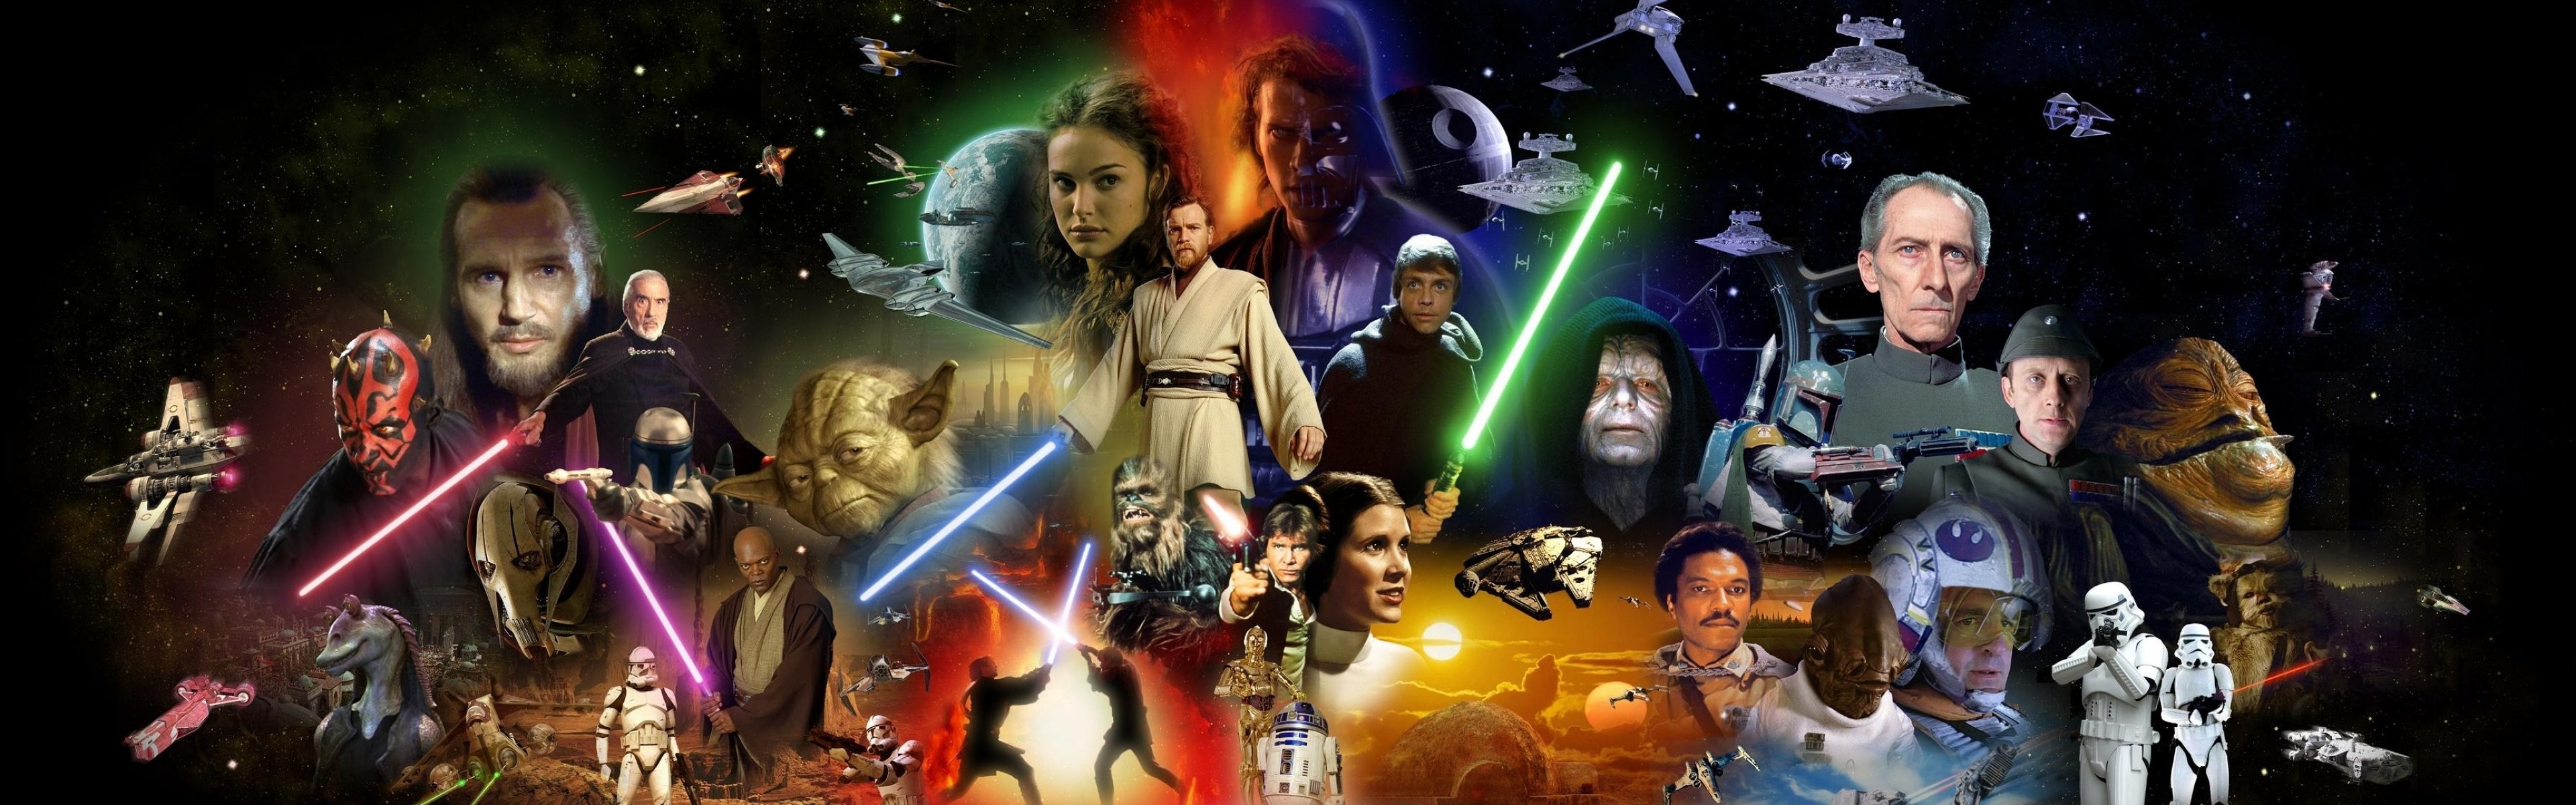 star wars high res